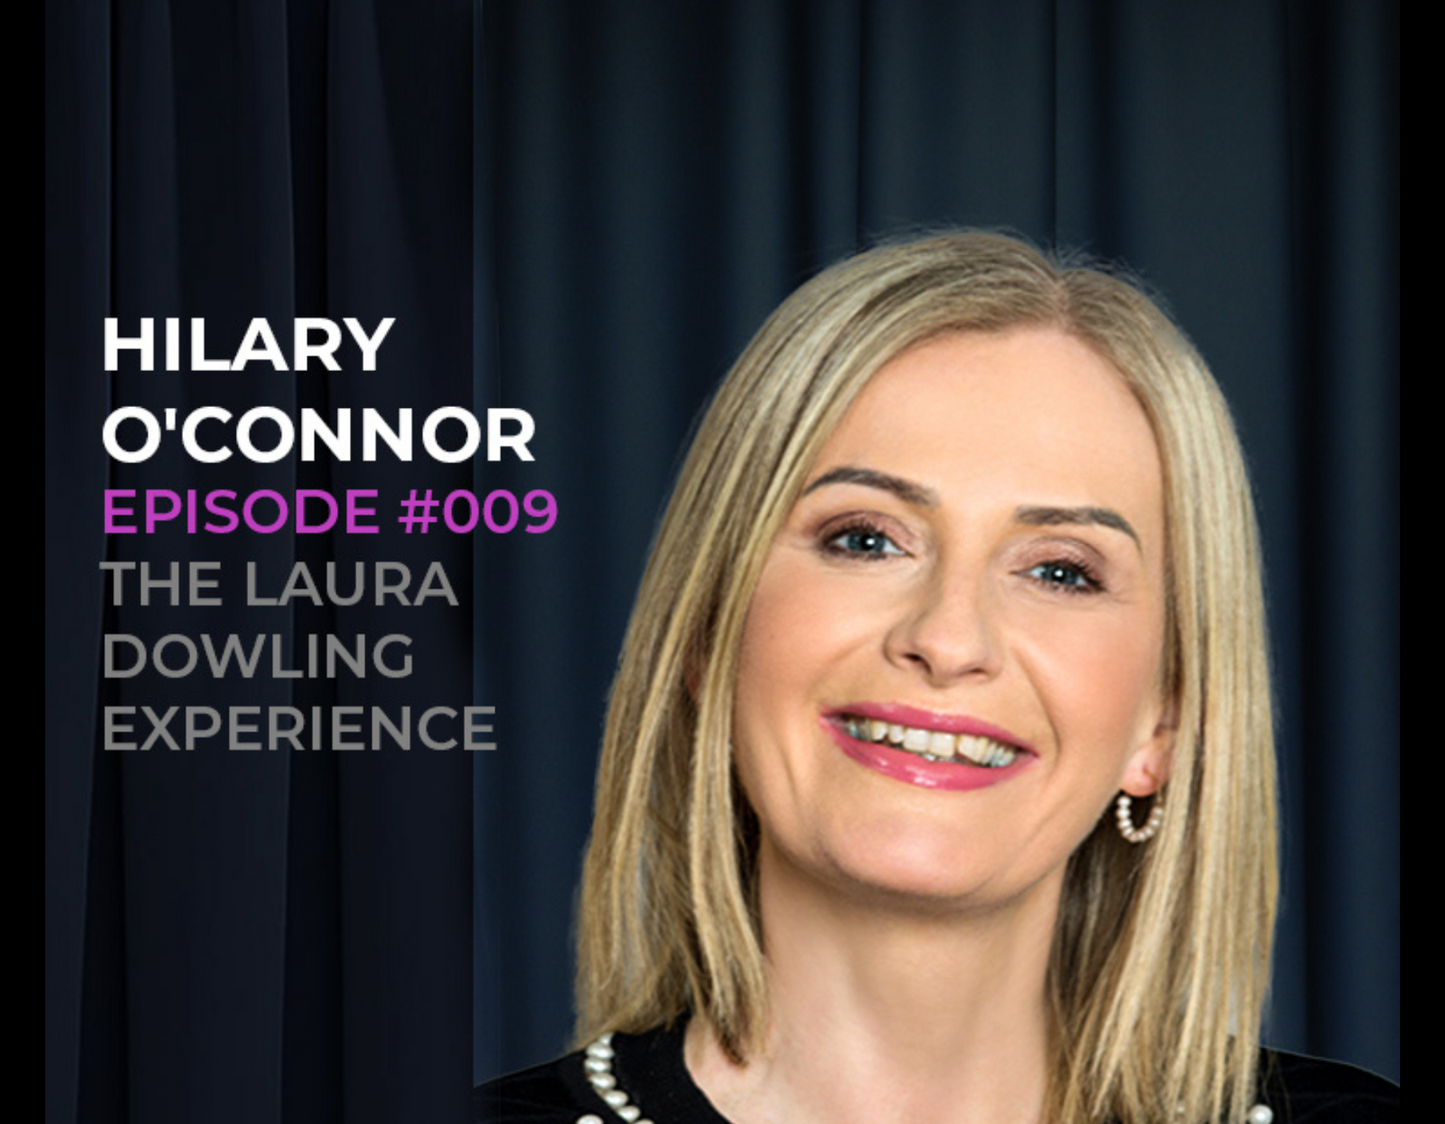 Separation and divorce with family law solicitor Hilary O'Connor. Episode #009